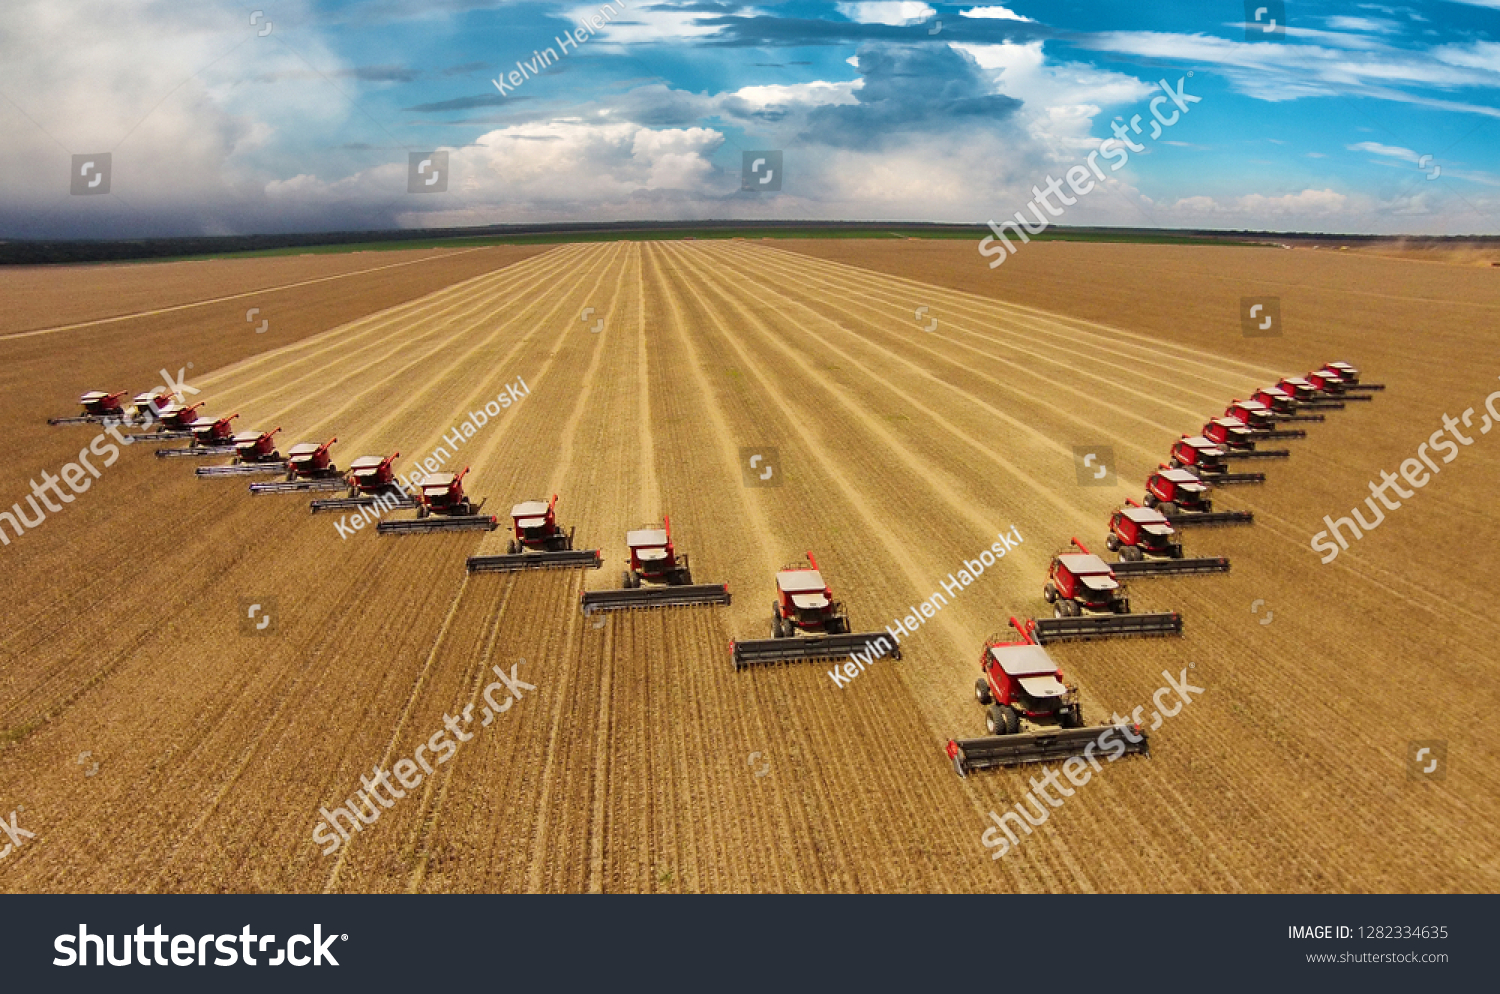 
22 Harvesters working in soybean harvest in the state of Mato Grosso, Brazil #1282334635